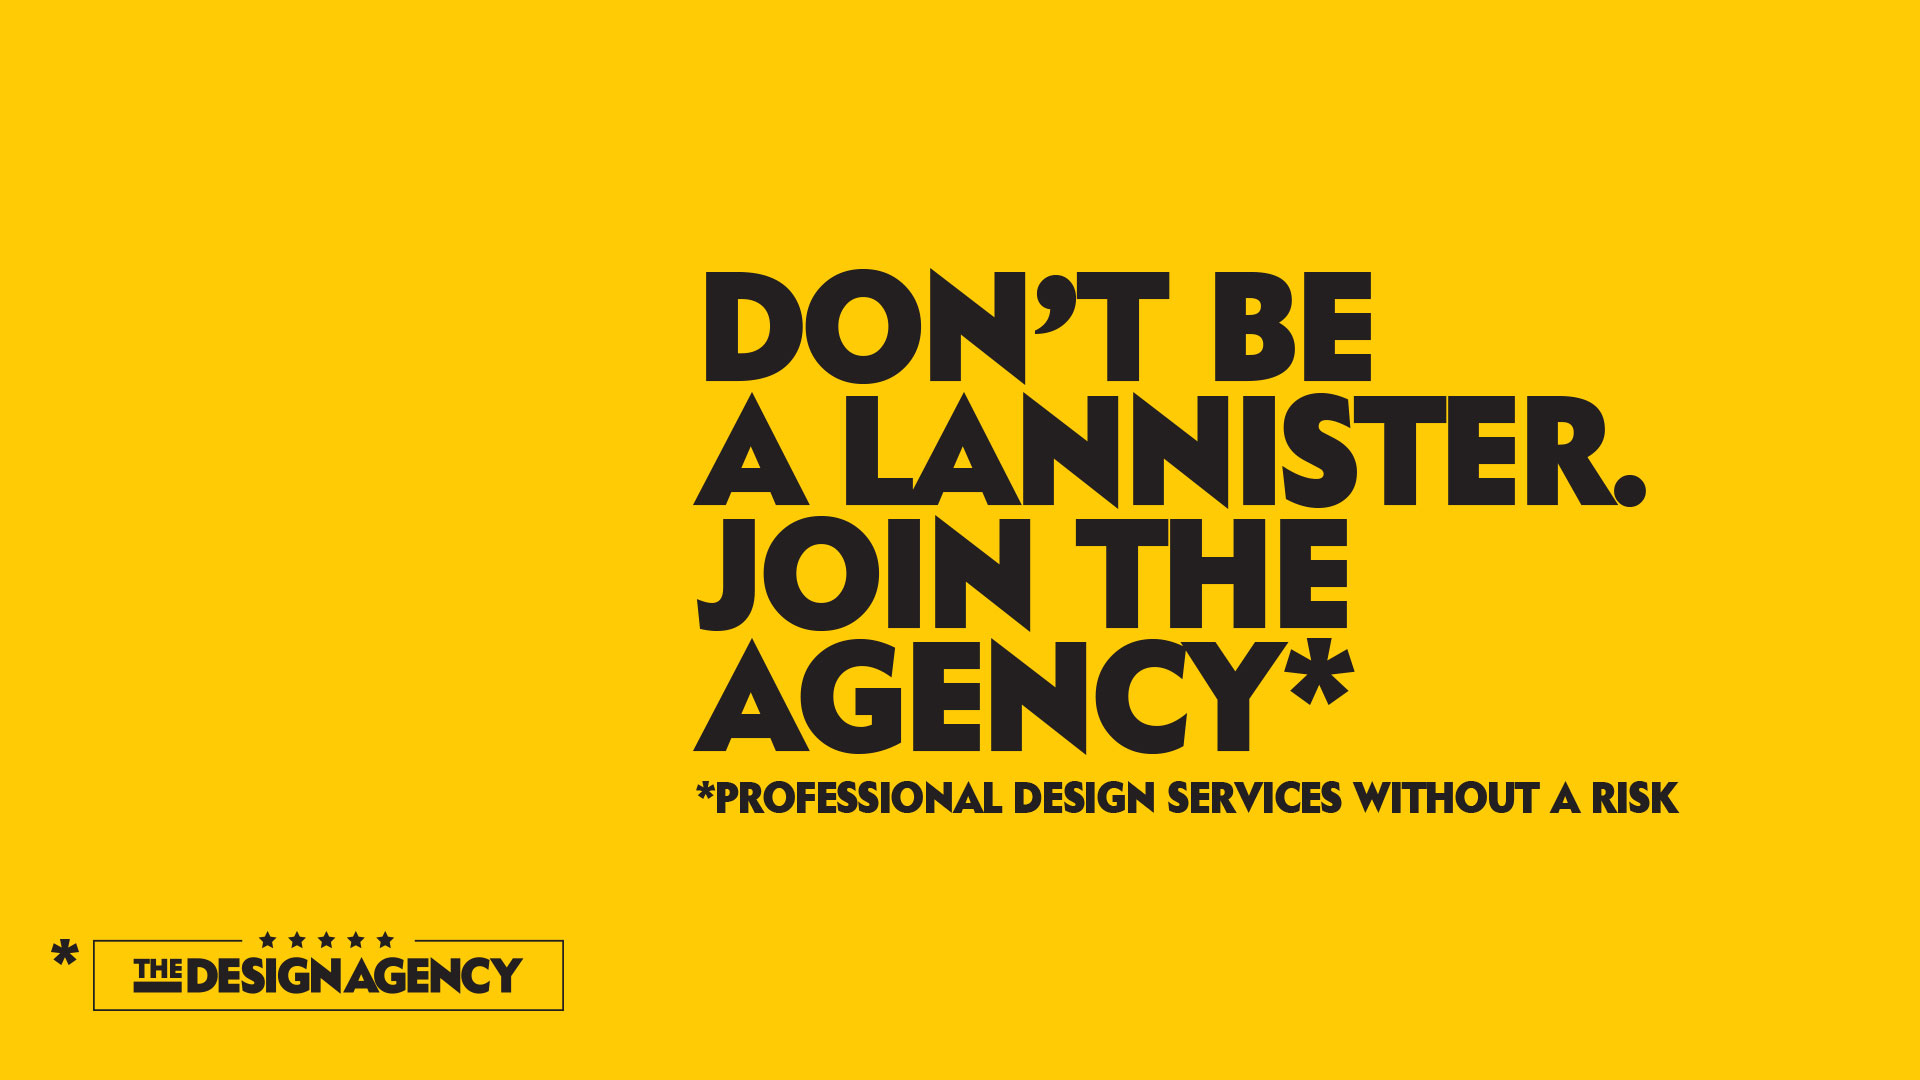 DON’T BE A LANNISTER. JOIN THE AGENCY